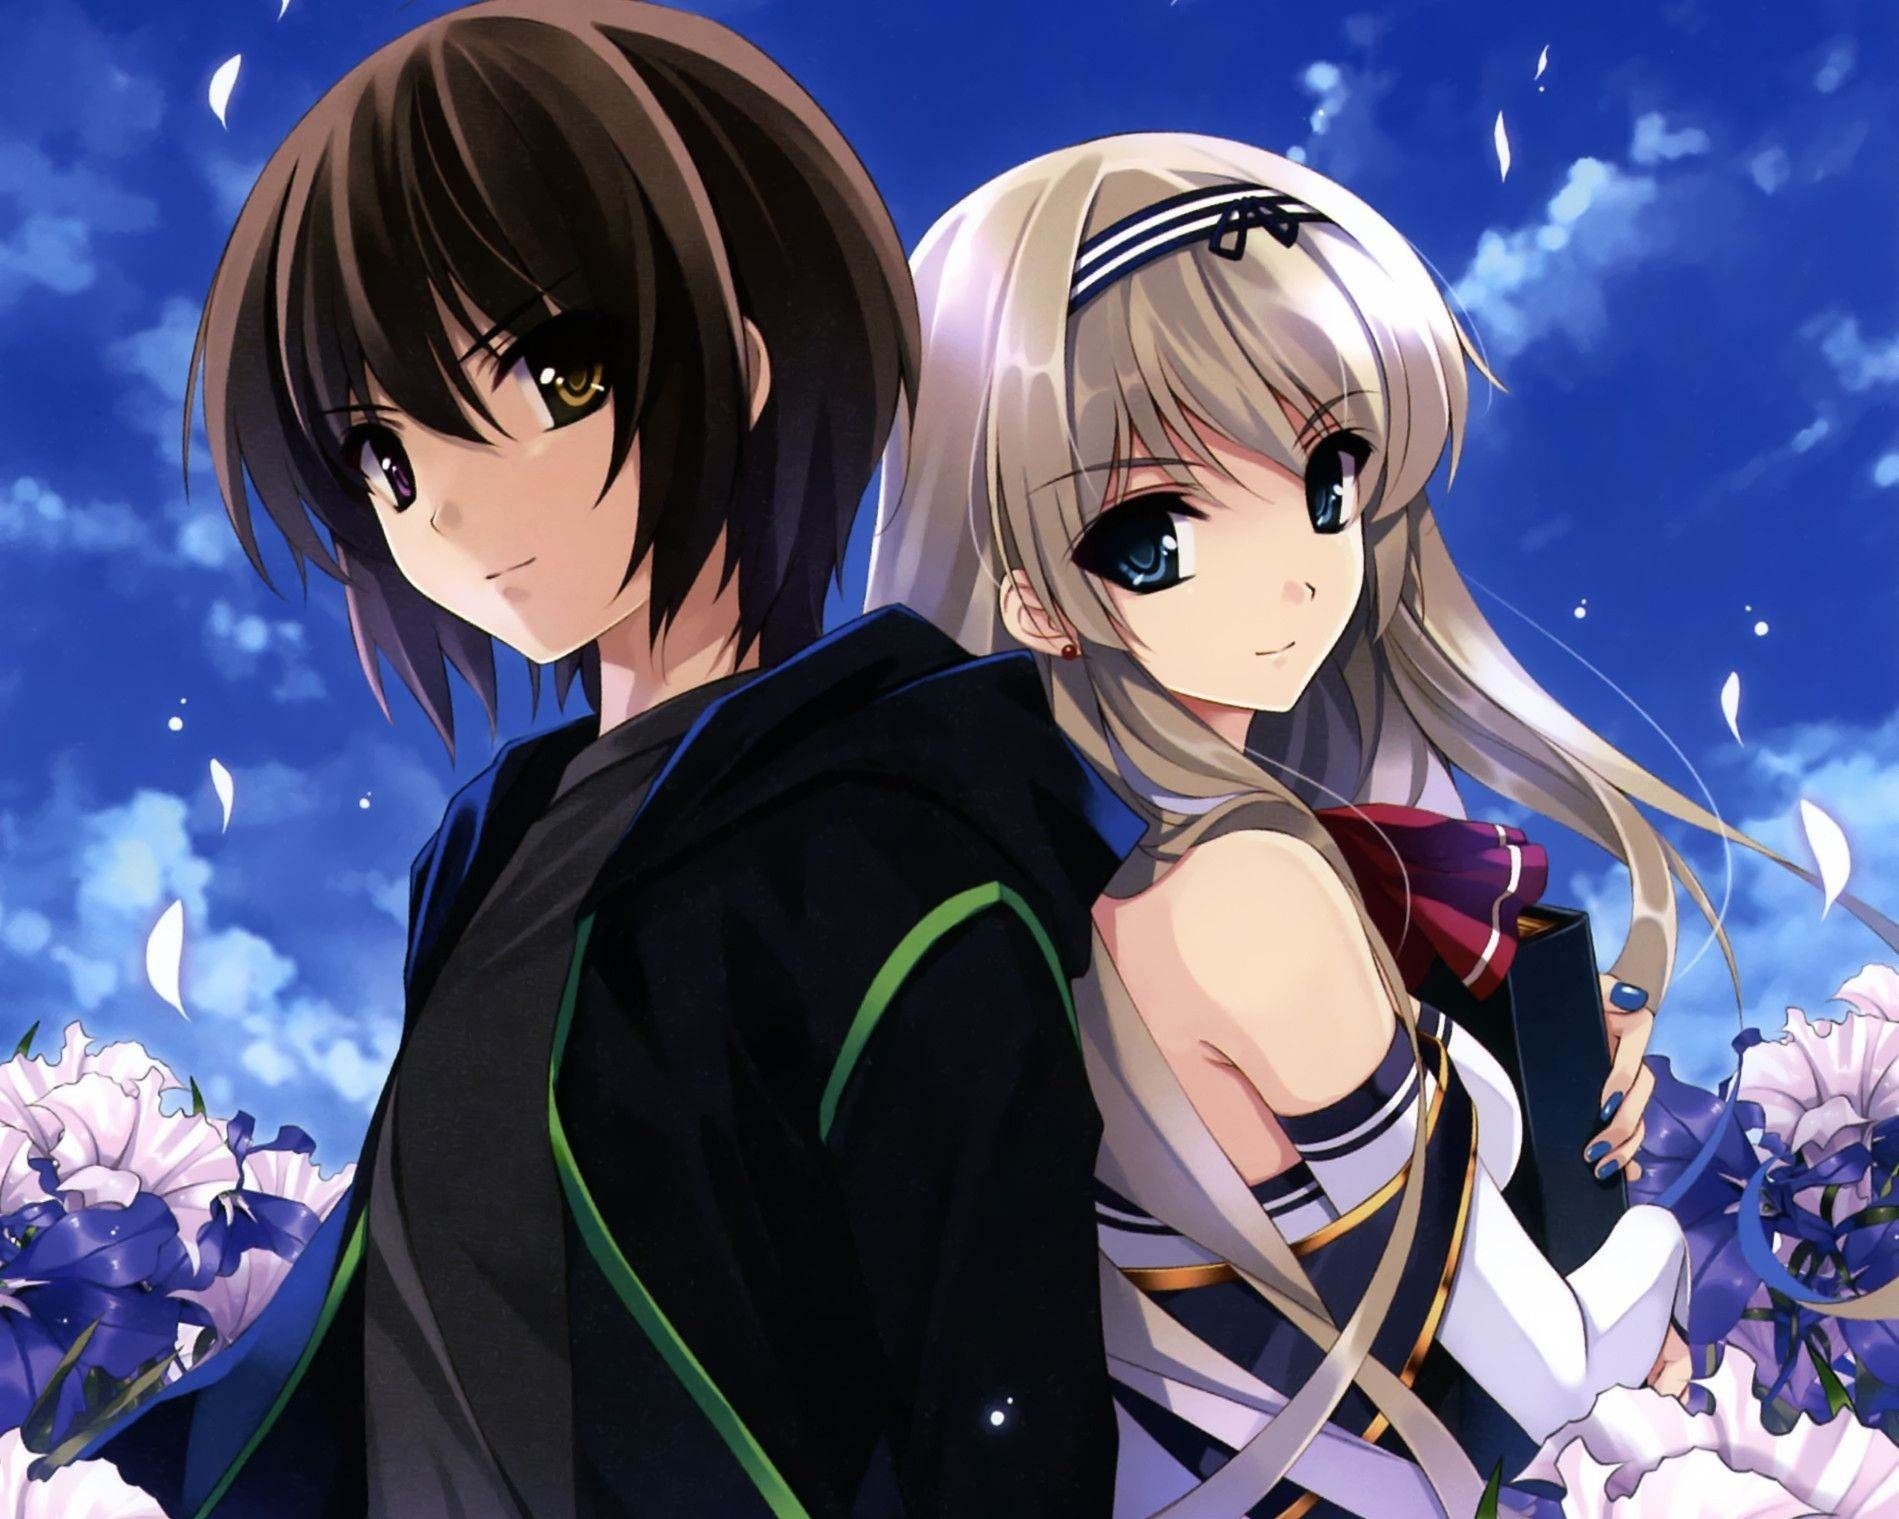 Anime Couples Romance Wallpapers Wallpaper Cave